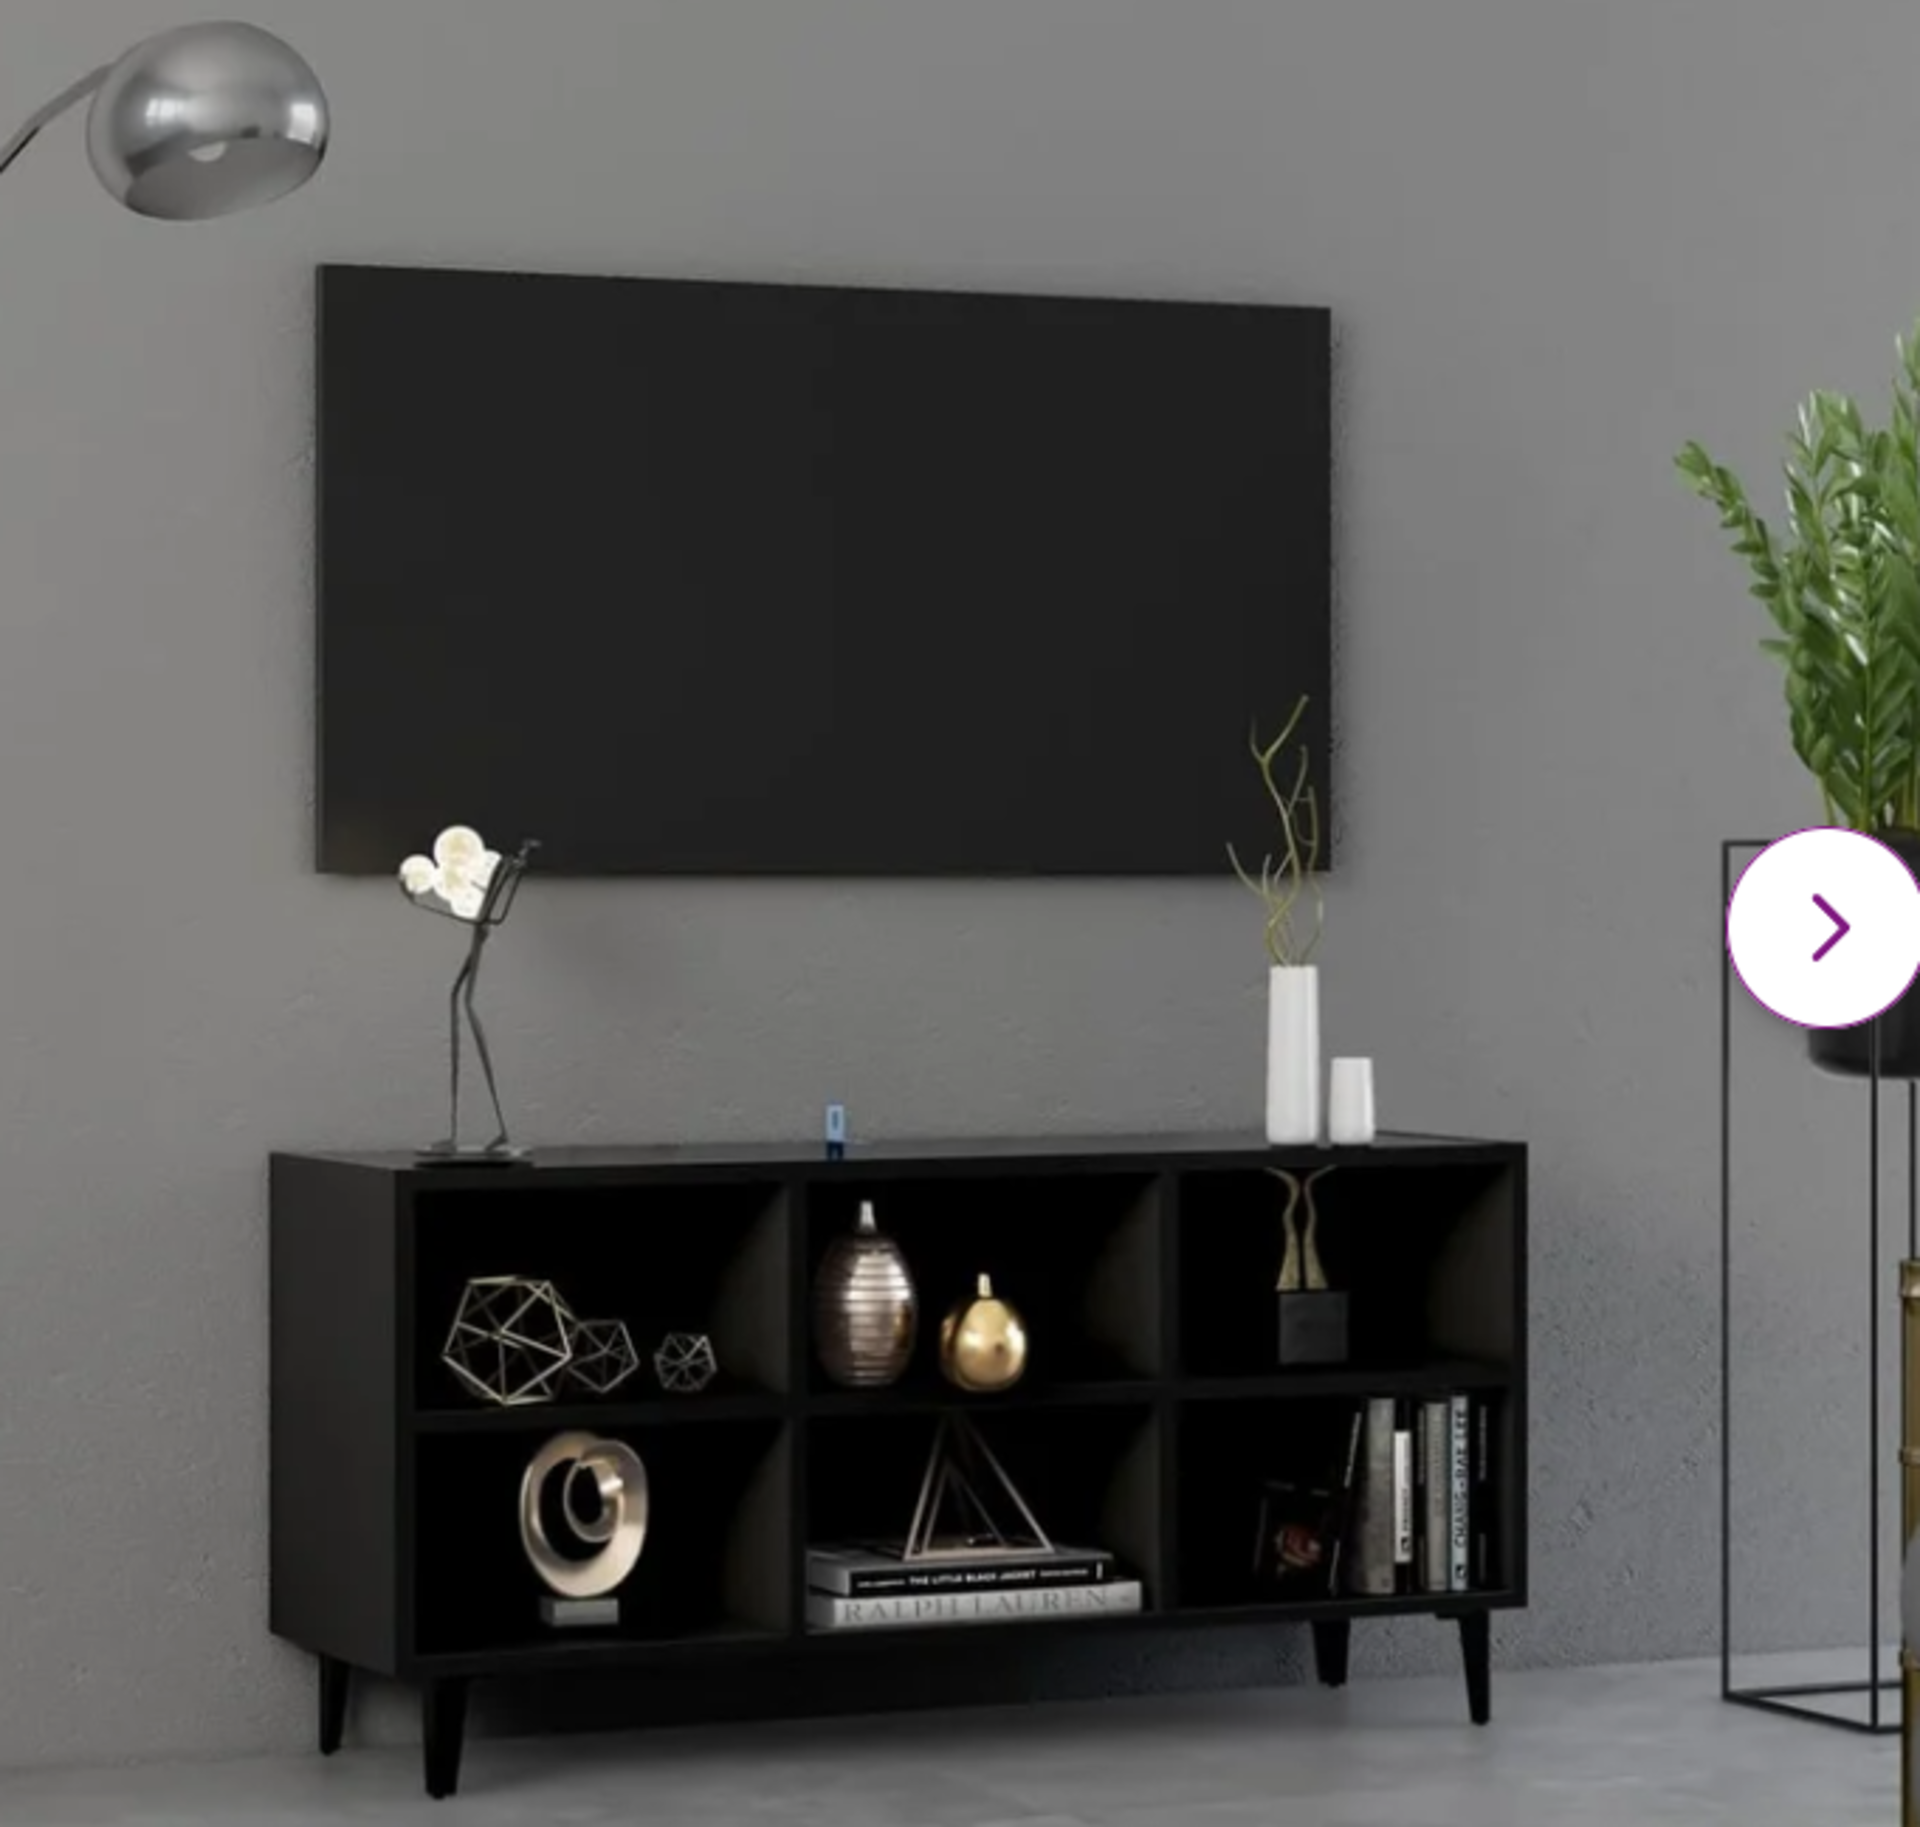 Stowthewold TV Stand for TVs up to 43". Upgrade your interior to the next level with this well-